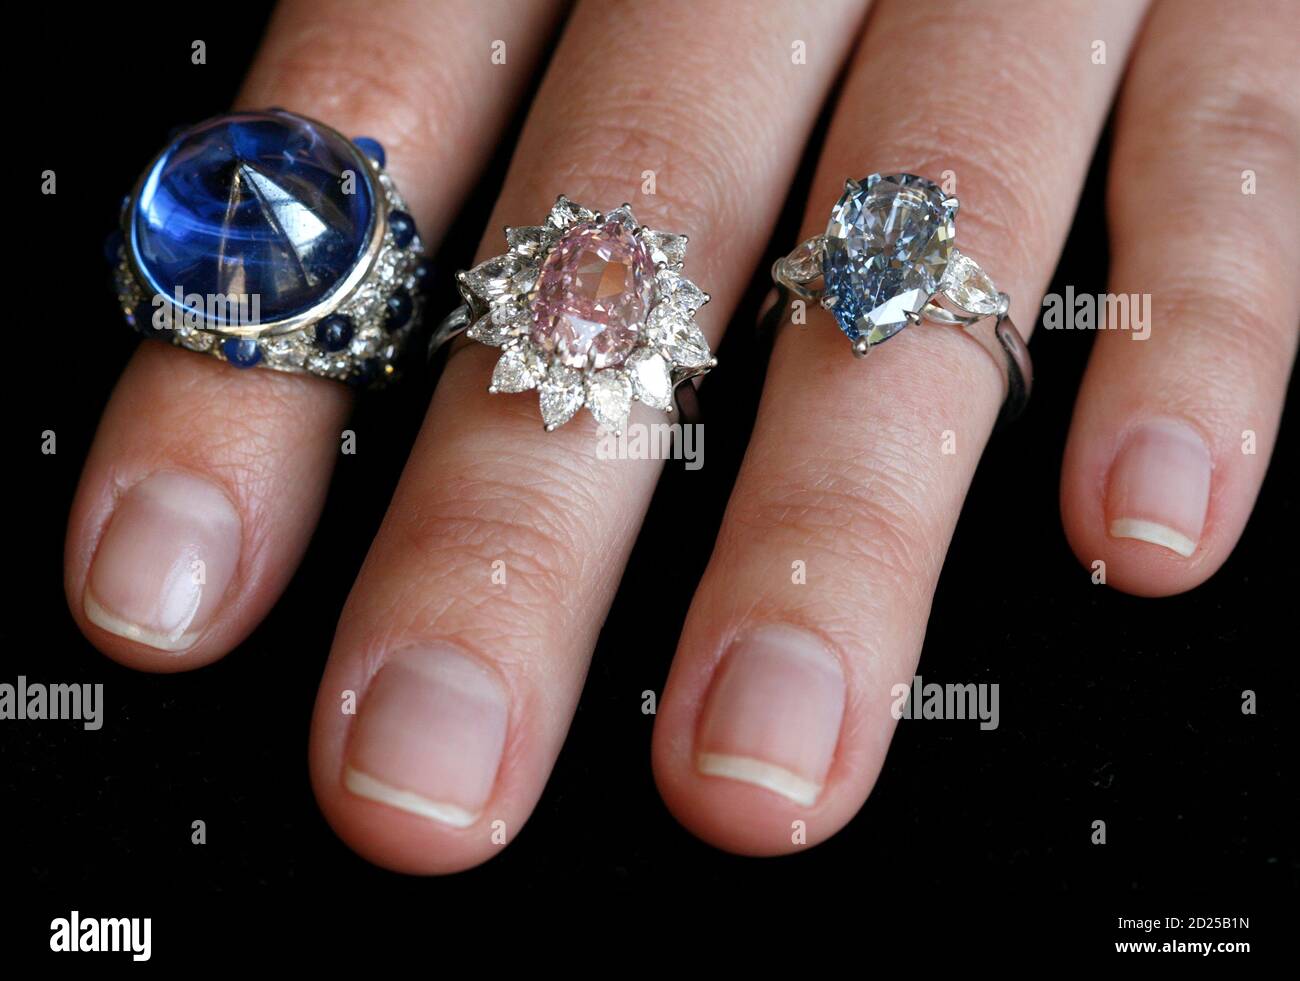 A model displays a cabochon sapphire-set ring dating form 1930 (L) a fancy vivid purplish pink diamond ring (C) and a fancy vivid blue pear-shaped diamond during a preview at Sotheby's auction house in Geneva May 7, 2008. These jewels are expected to reach between $ 20,000 and $ 30,000, between $ 2,350,000 and $ 2,850,000 and between $ 2,800,000 and $ 3,500,000 during an auction sale in Geneva May 15.   REUTERS/Denis Balibouse   (SWITZERLAND) Stock Photo